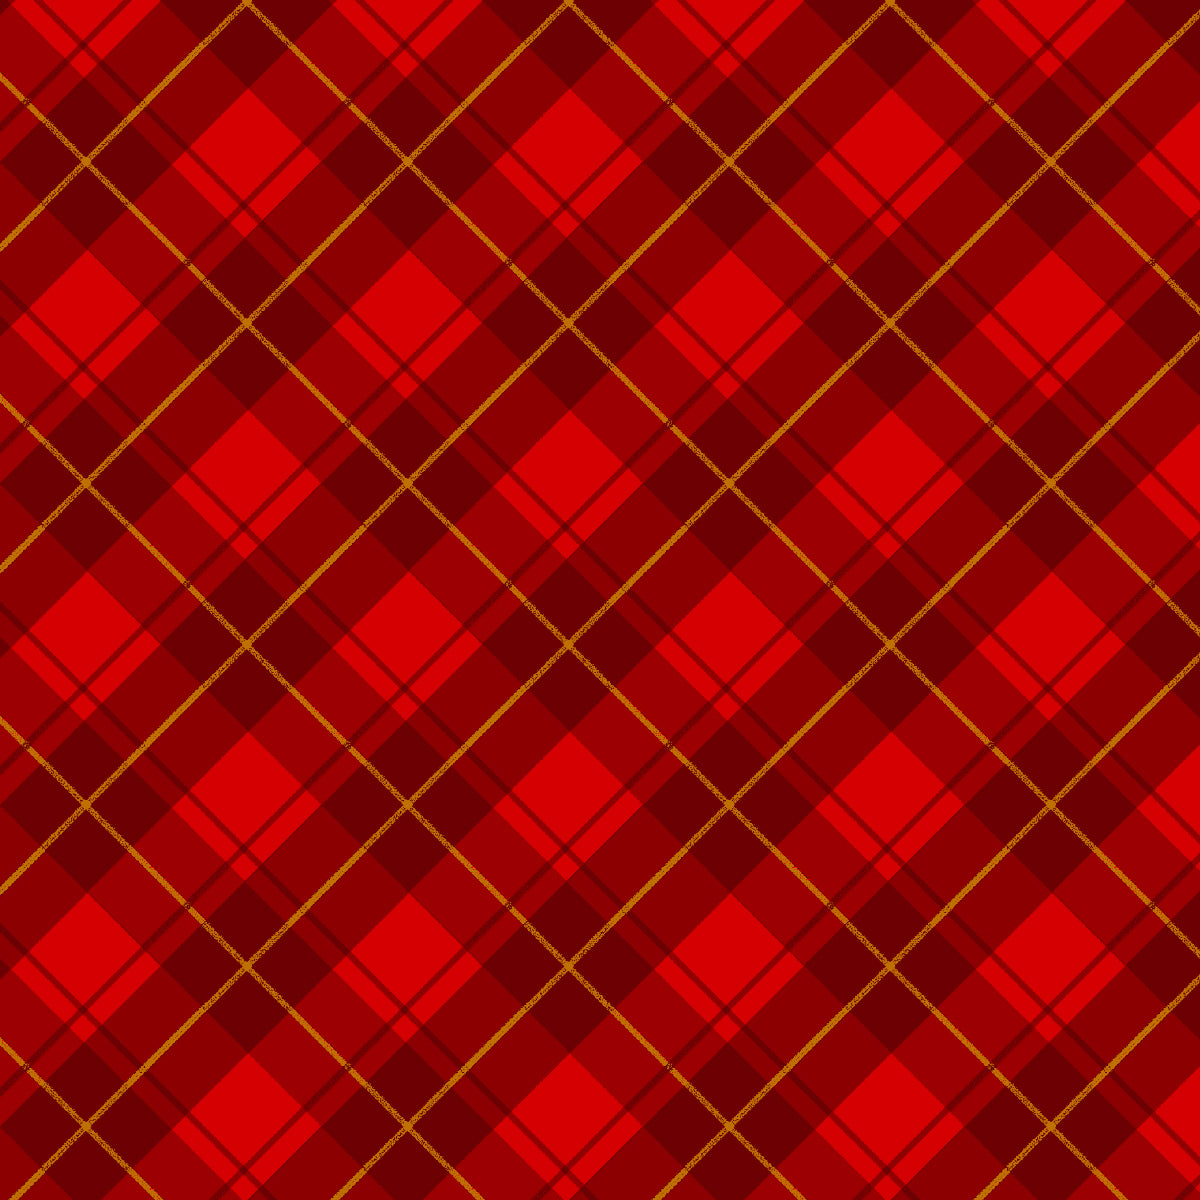 Merry Town by Sharla Fults Diagonal Plaid Red 6368-88 Cotton Woven